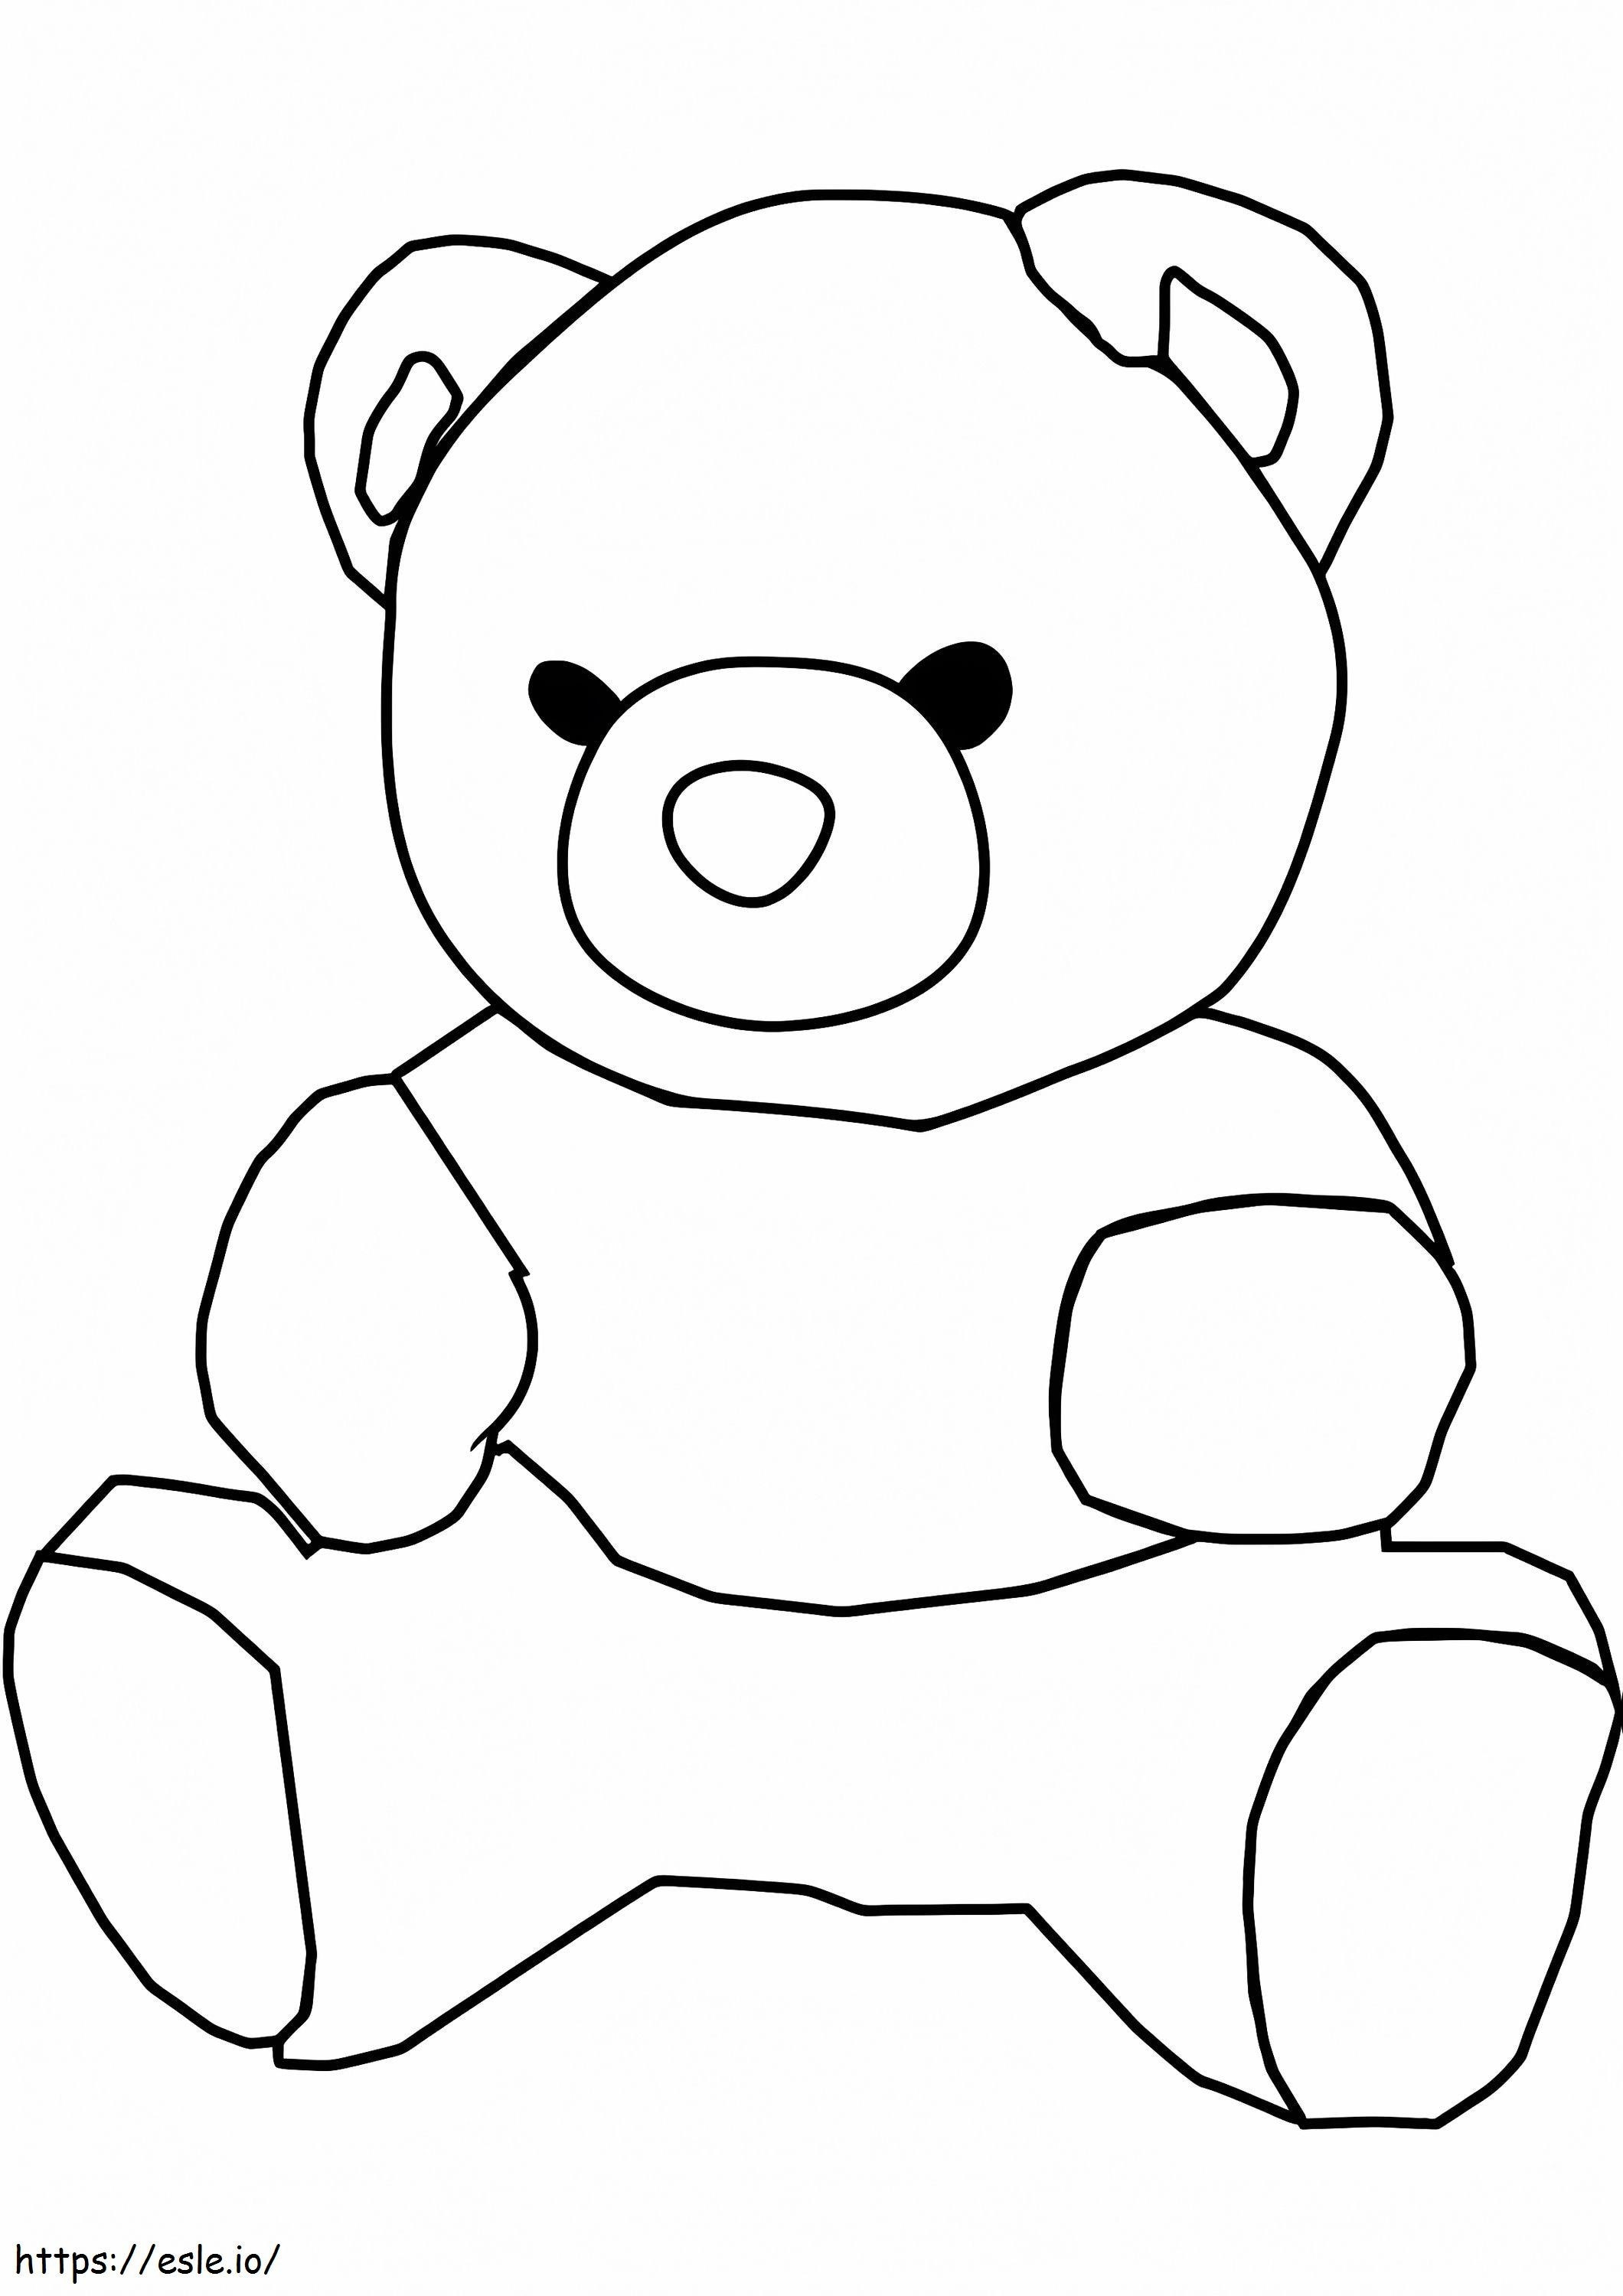 Teddy Bear To Color coloring page